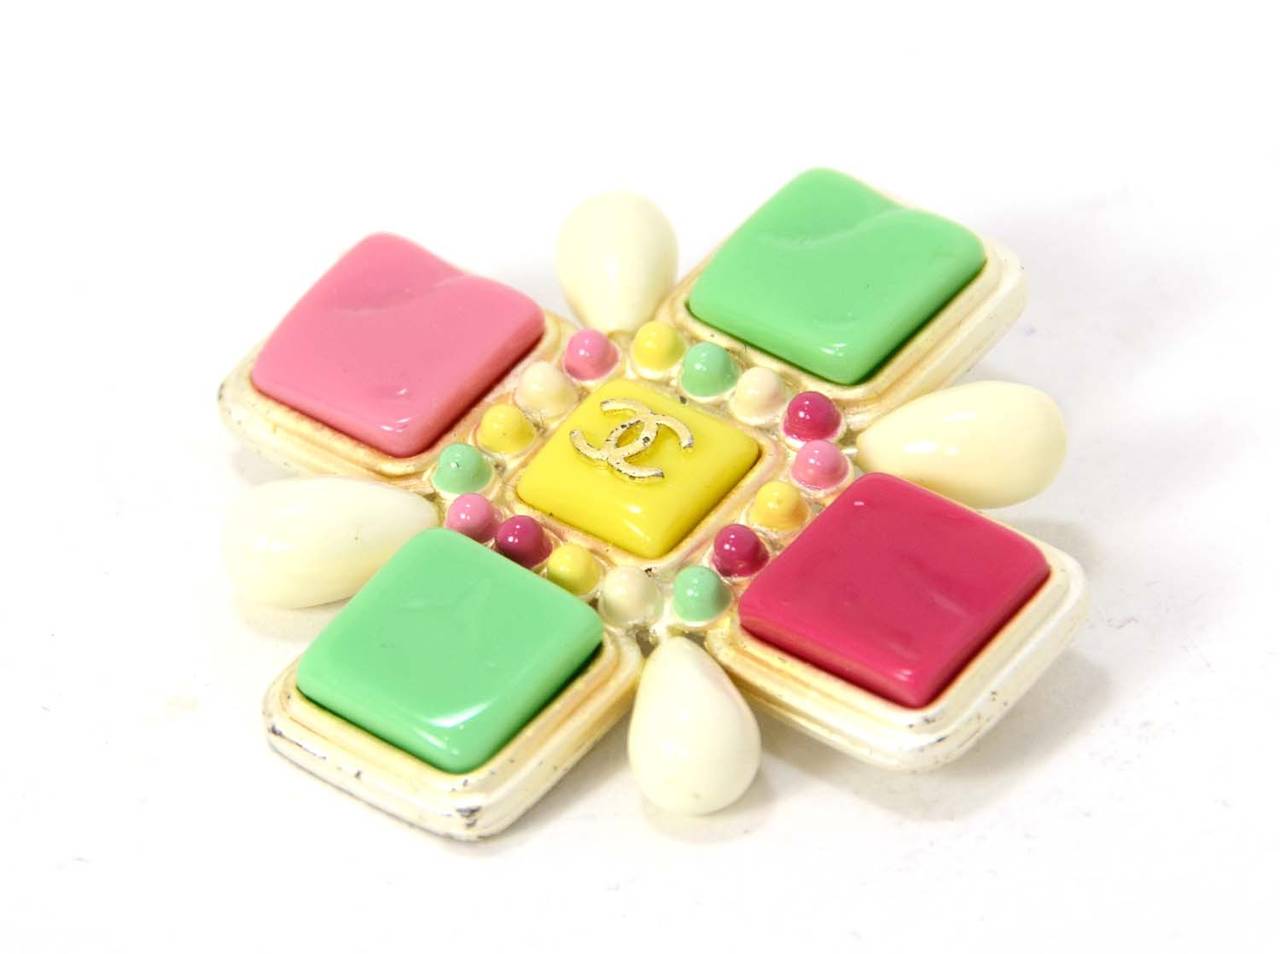 This beautiful and versatile accessory can be worn as a brooch or hooked on a chain as a necklace pendant

Made in: France
Year of Production: 2004
Color: Pink, Green, White, Yellow
Materials: Enamel, resin & metal
Stamps: CHANEL 04 CC C MADE